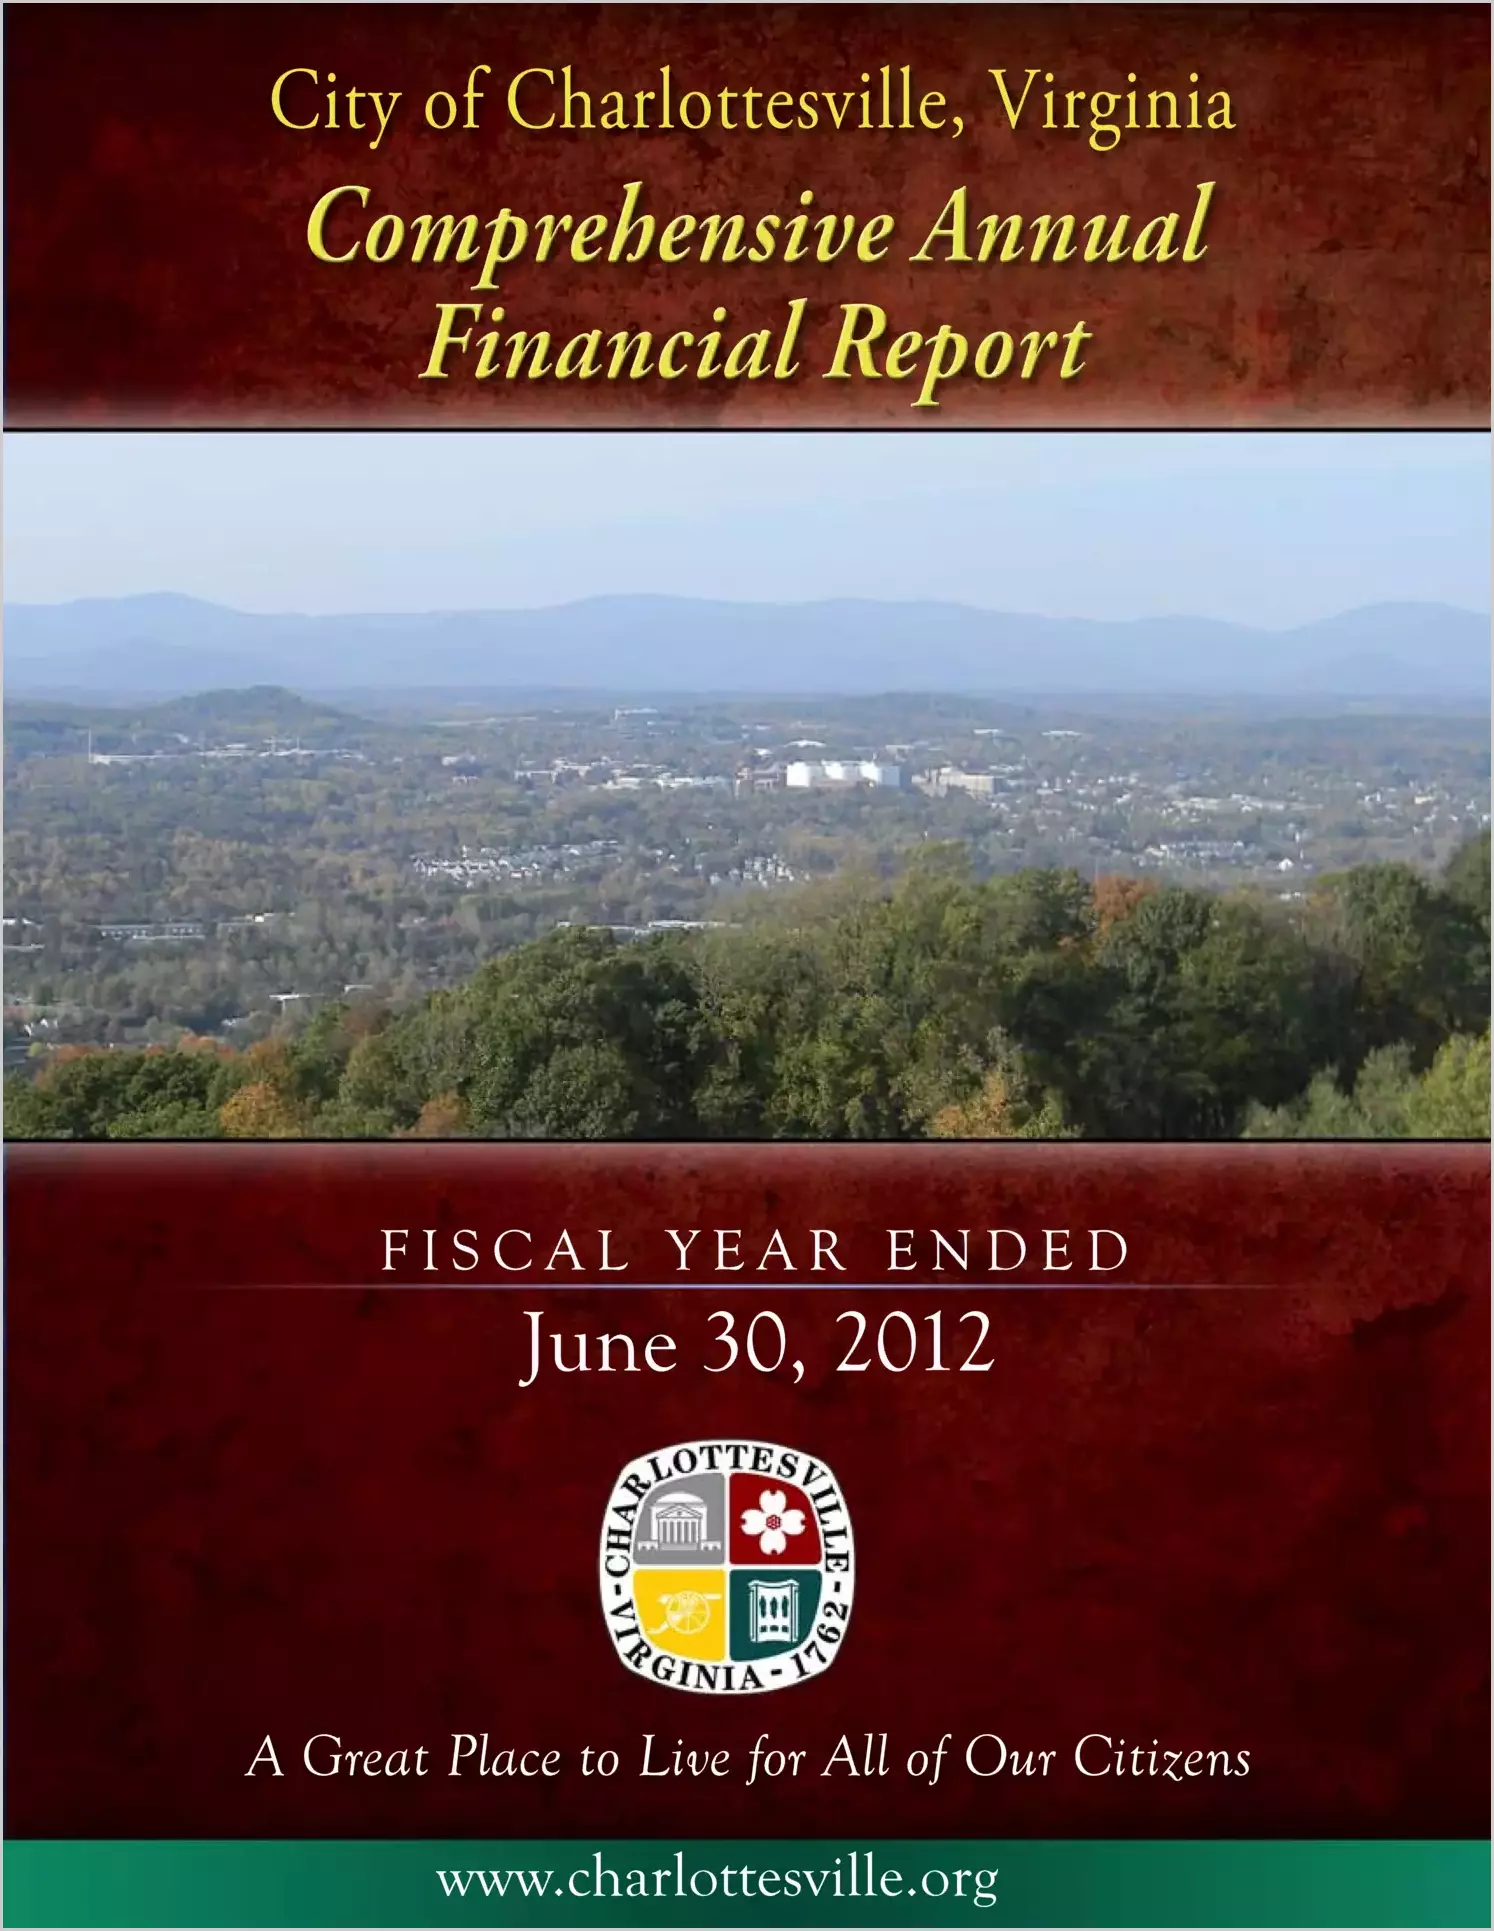 2012 Annual Financial Report for City of Charlottesville